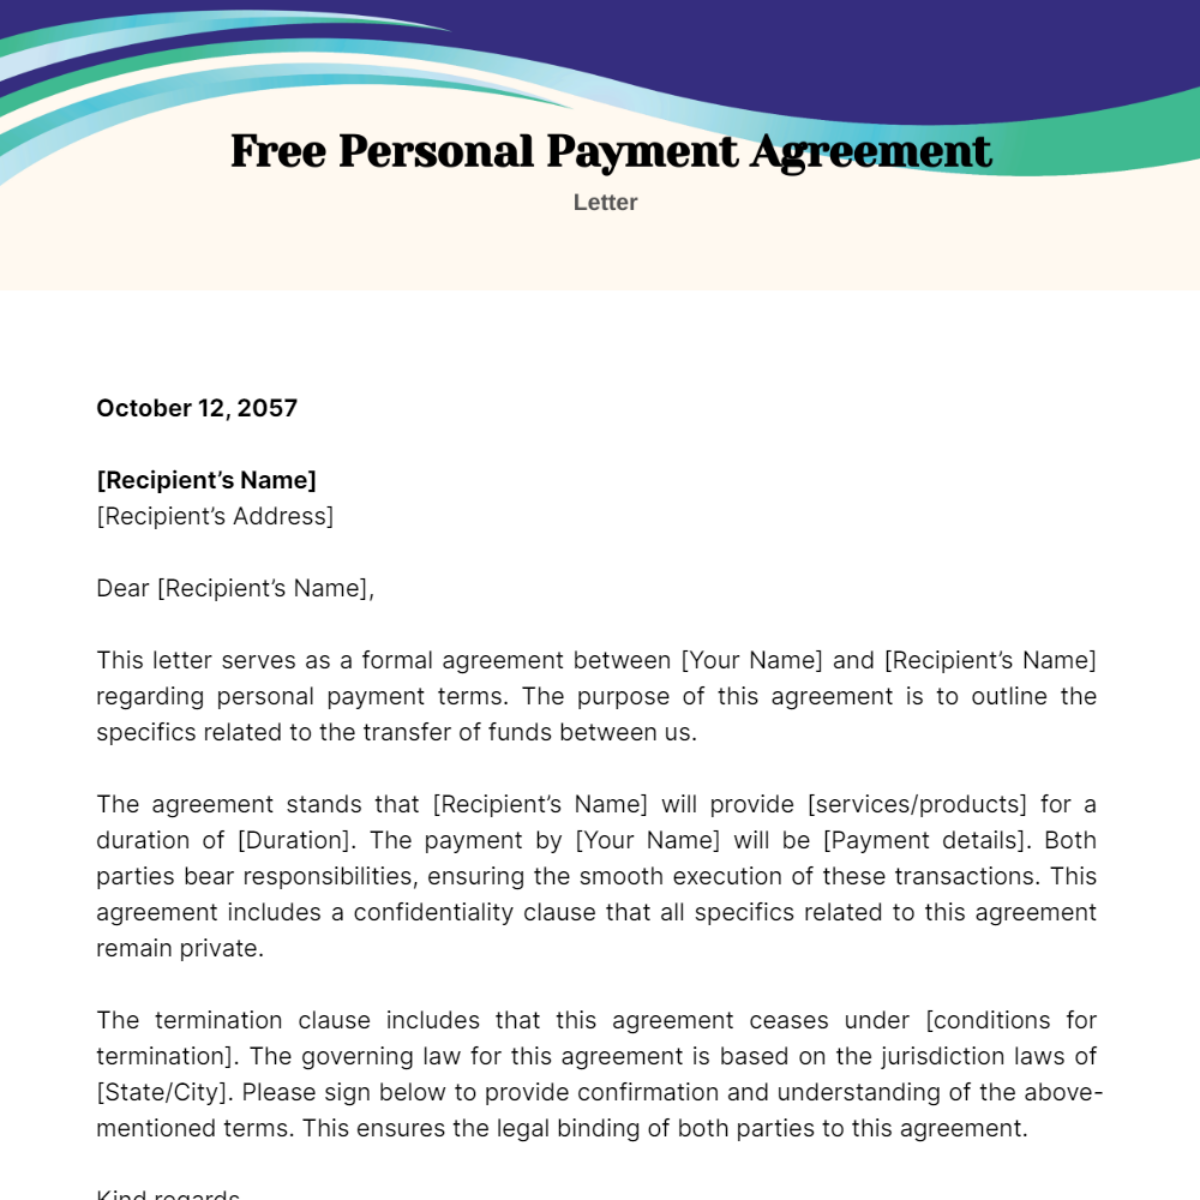 Personal Payment Agreement Letter Template